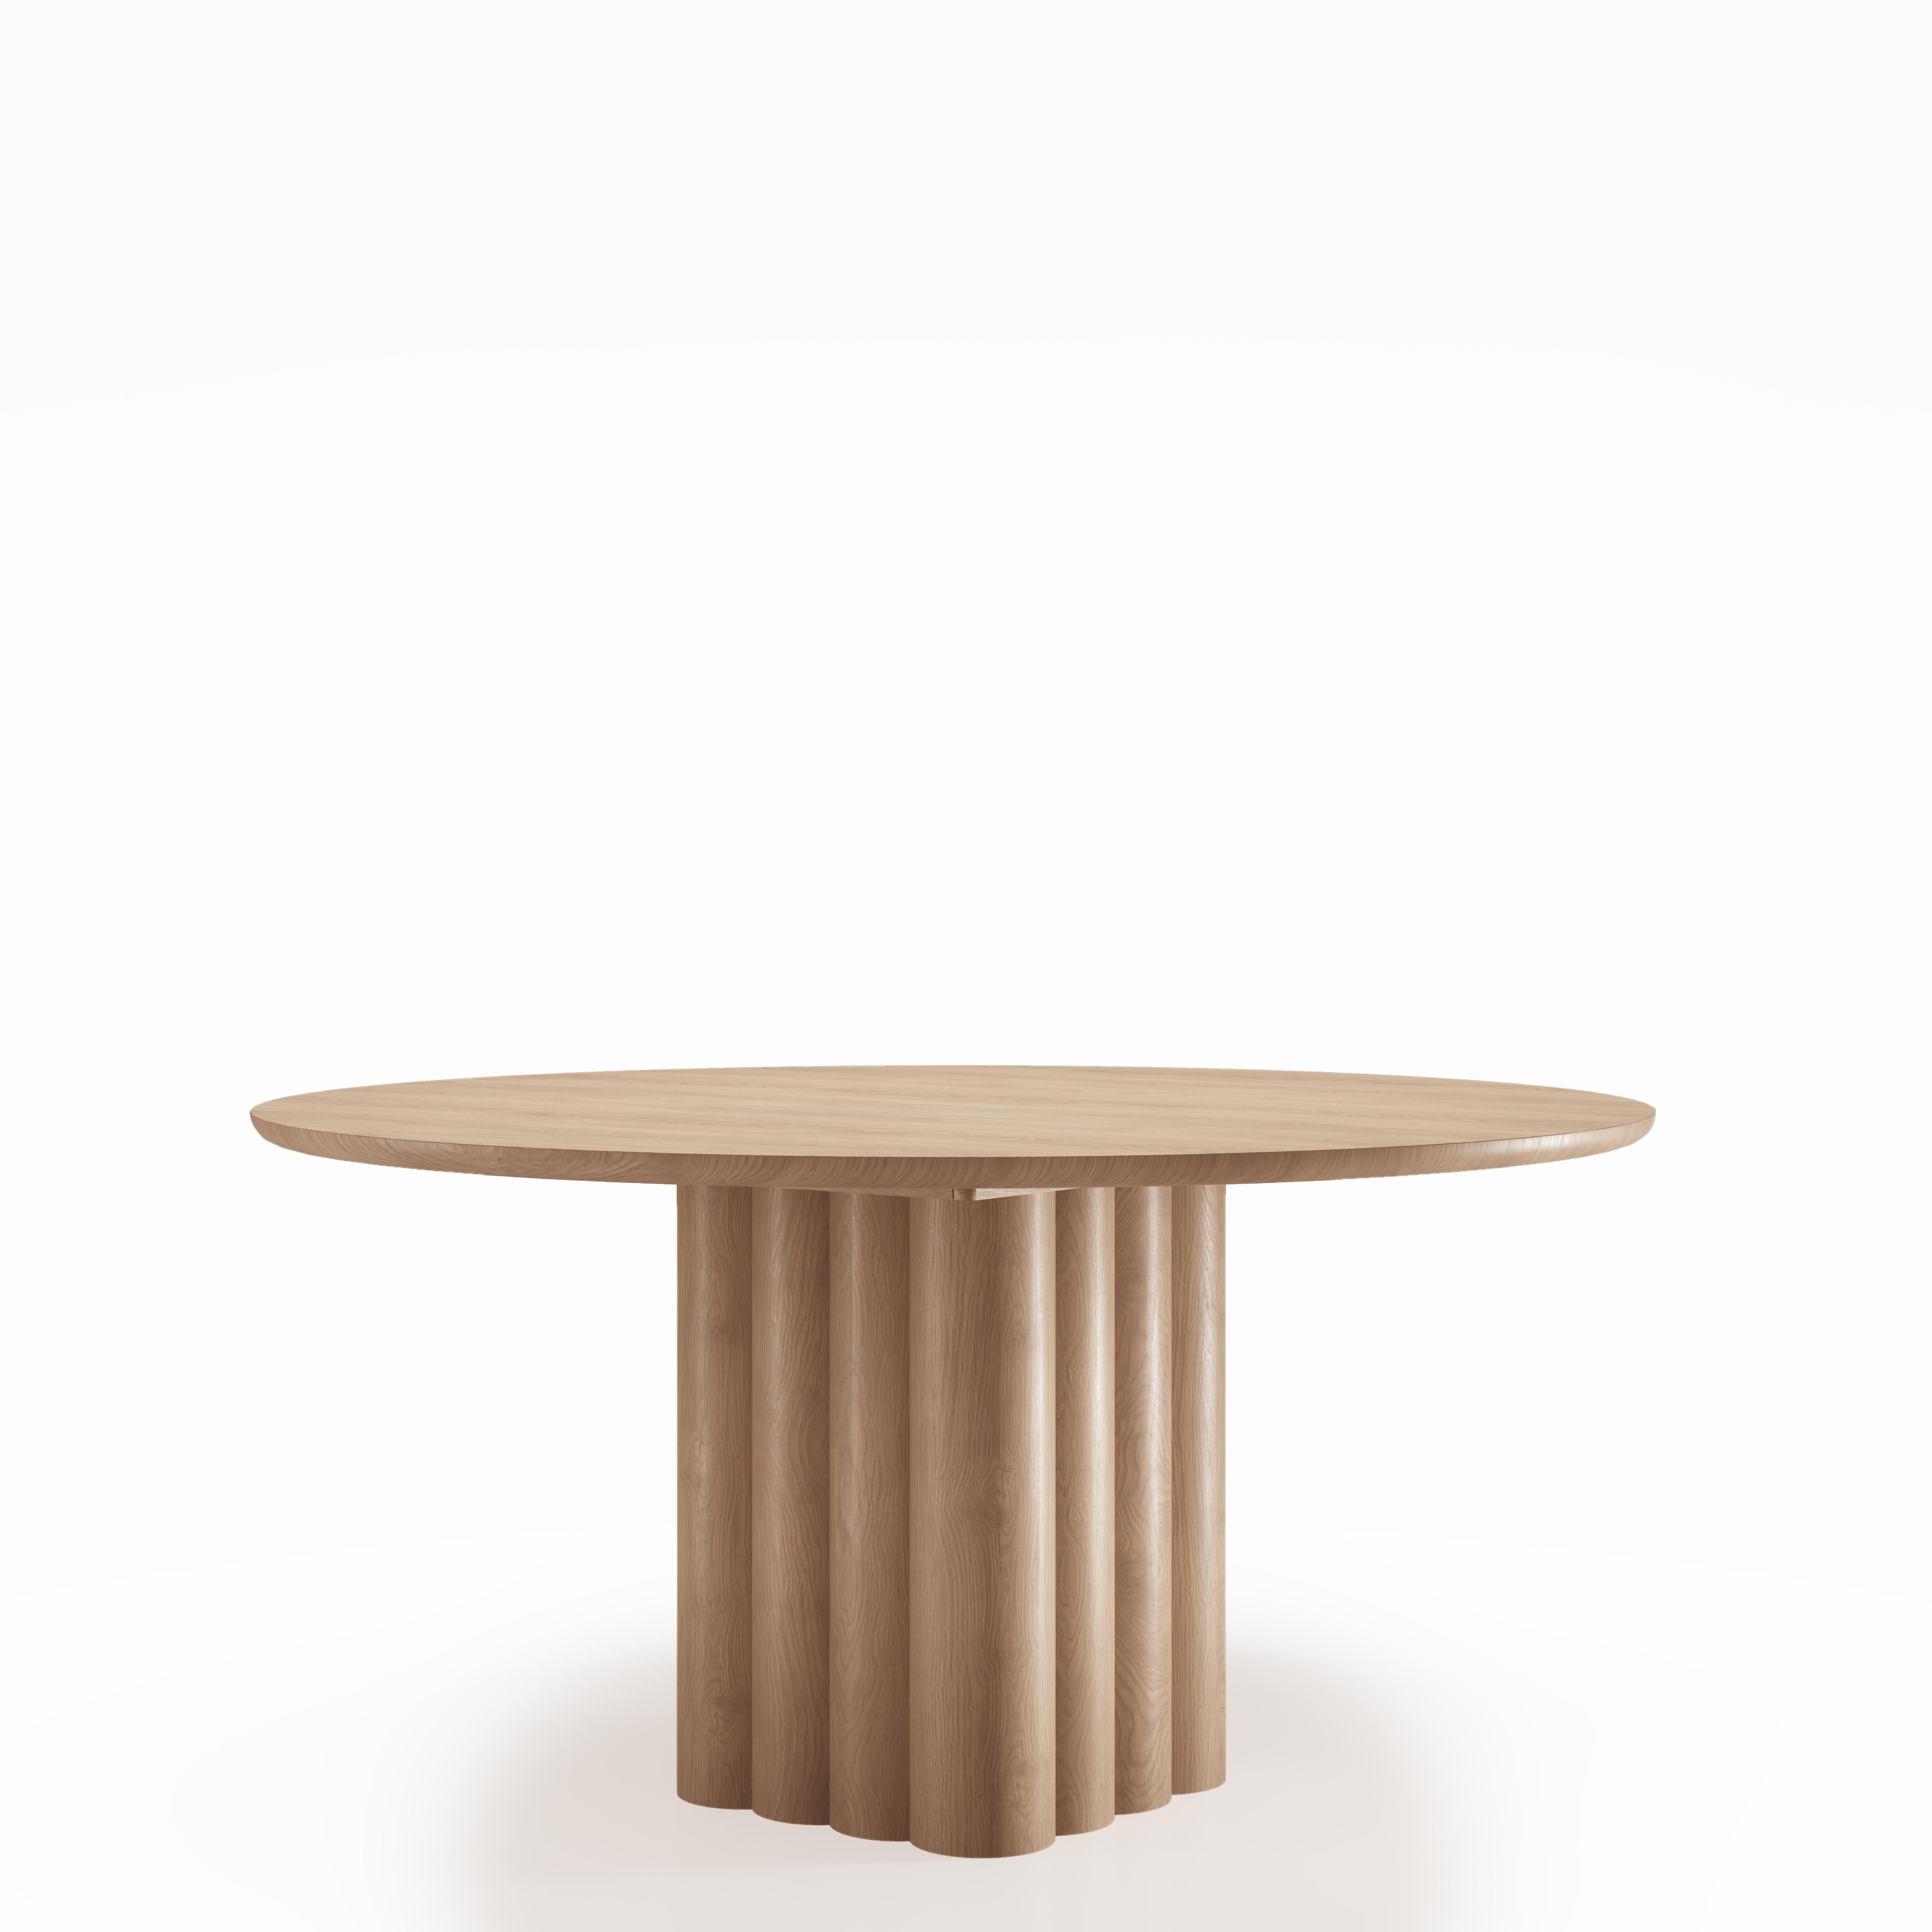 Round Dining Table 'Plush' by Dk3, Smoked Oak or Walnut, 140 cm For Sale 8